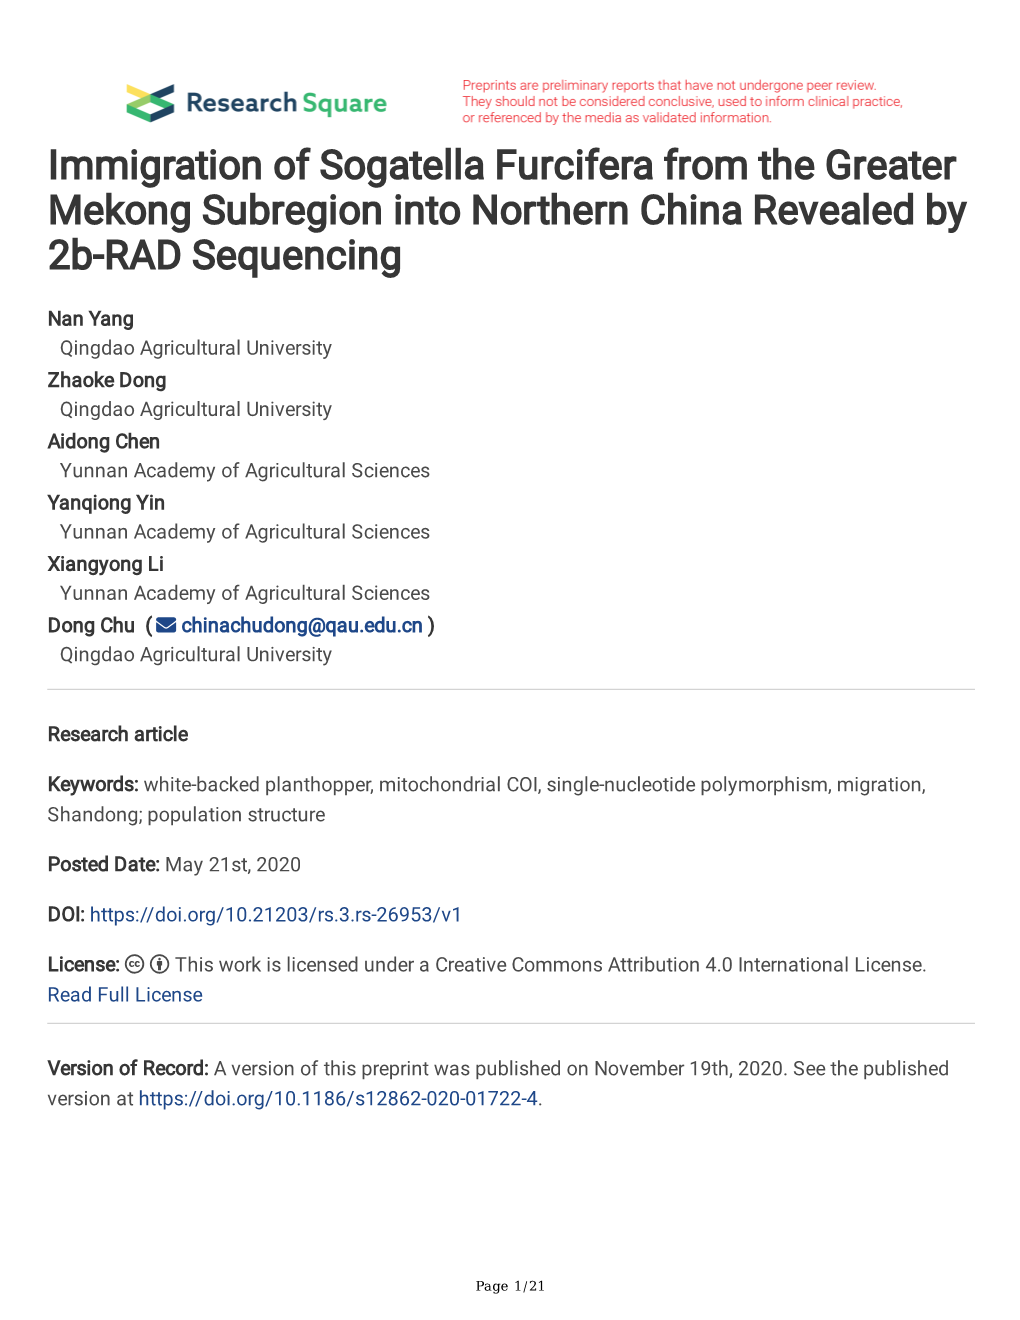 Immigration of Sogatella Furcifera from the Greater Mekong Subregion Into Northern China Revealed by 2B-RAD Sequencing